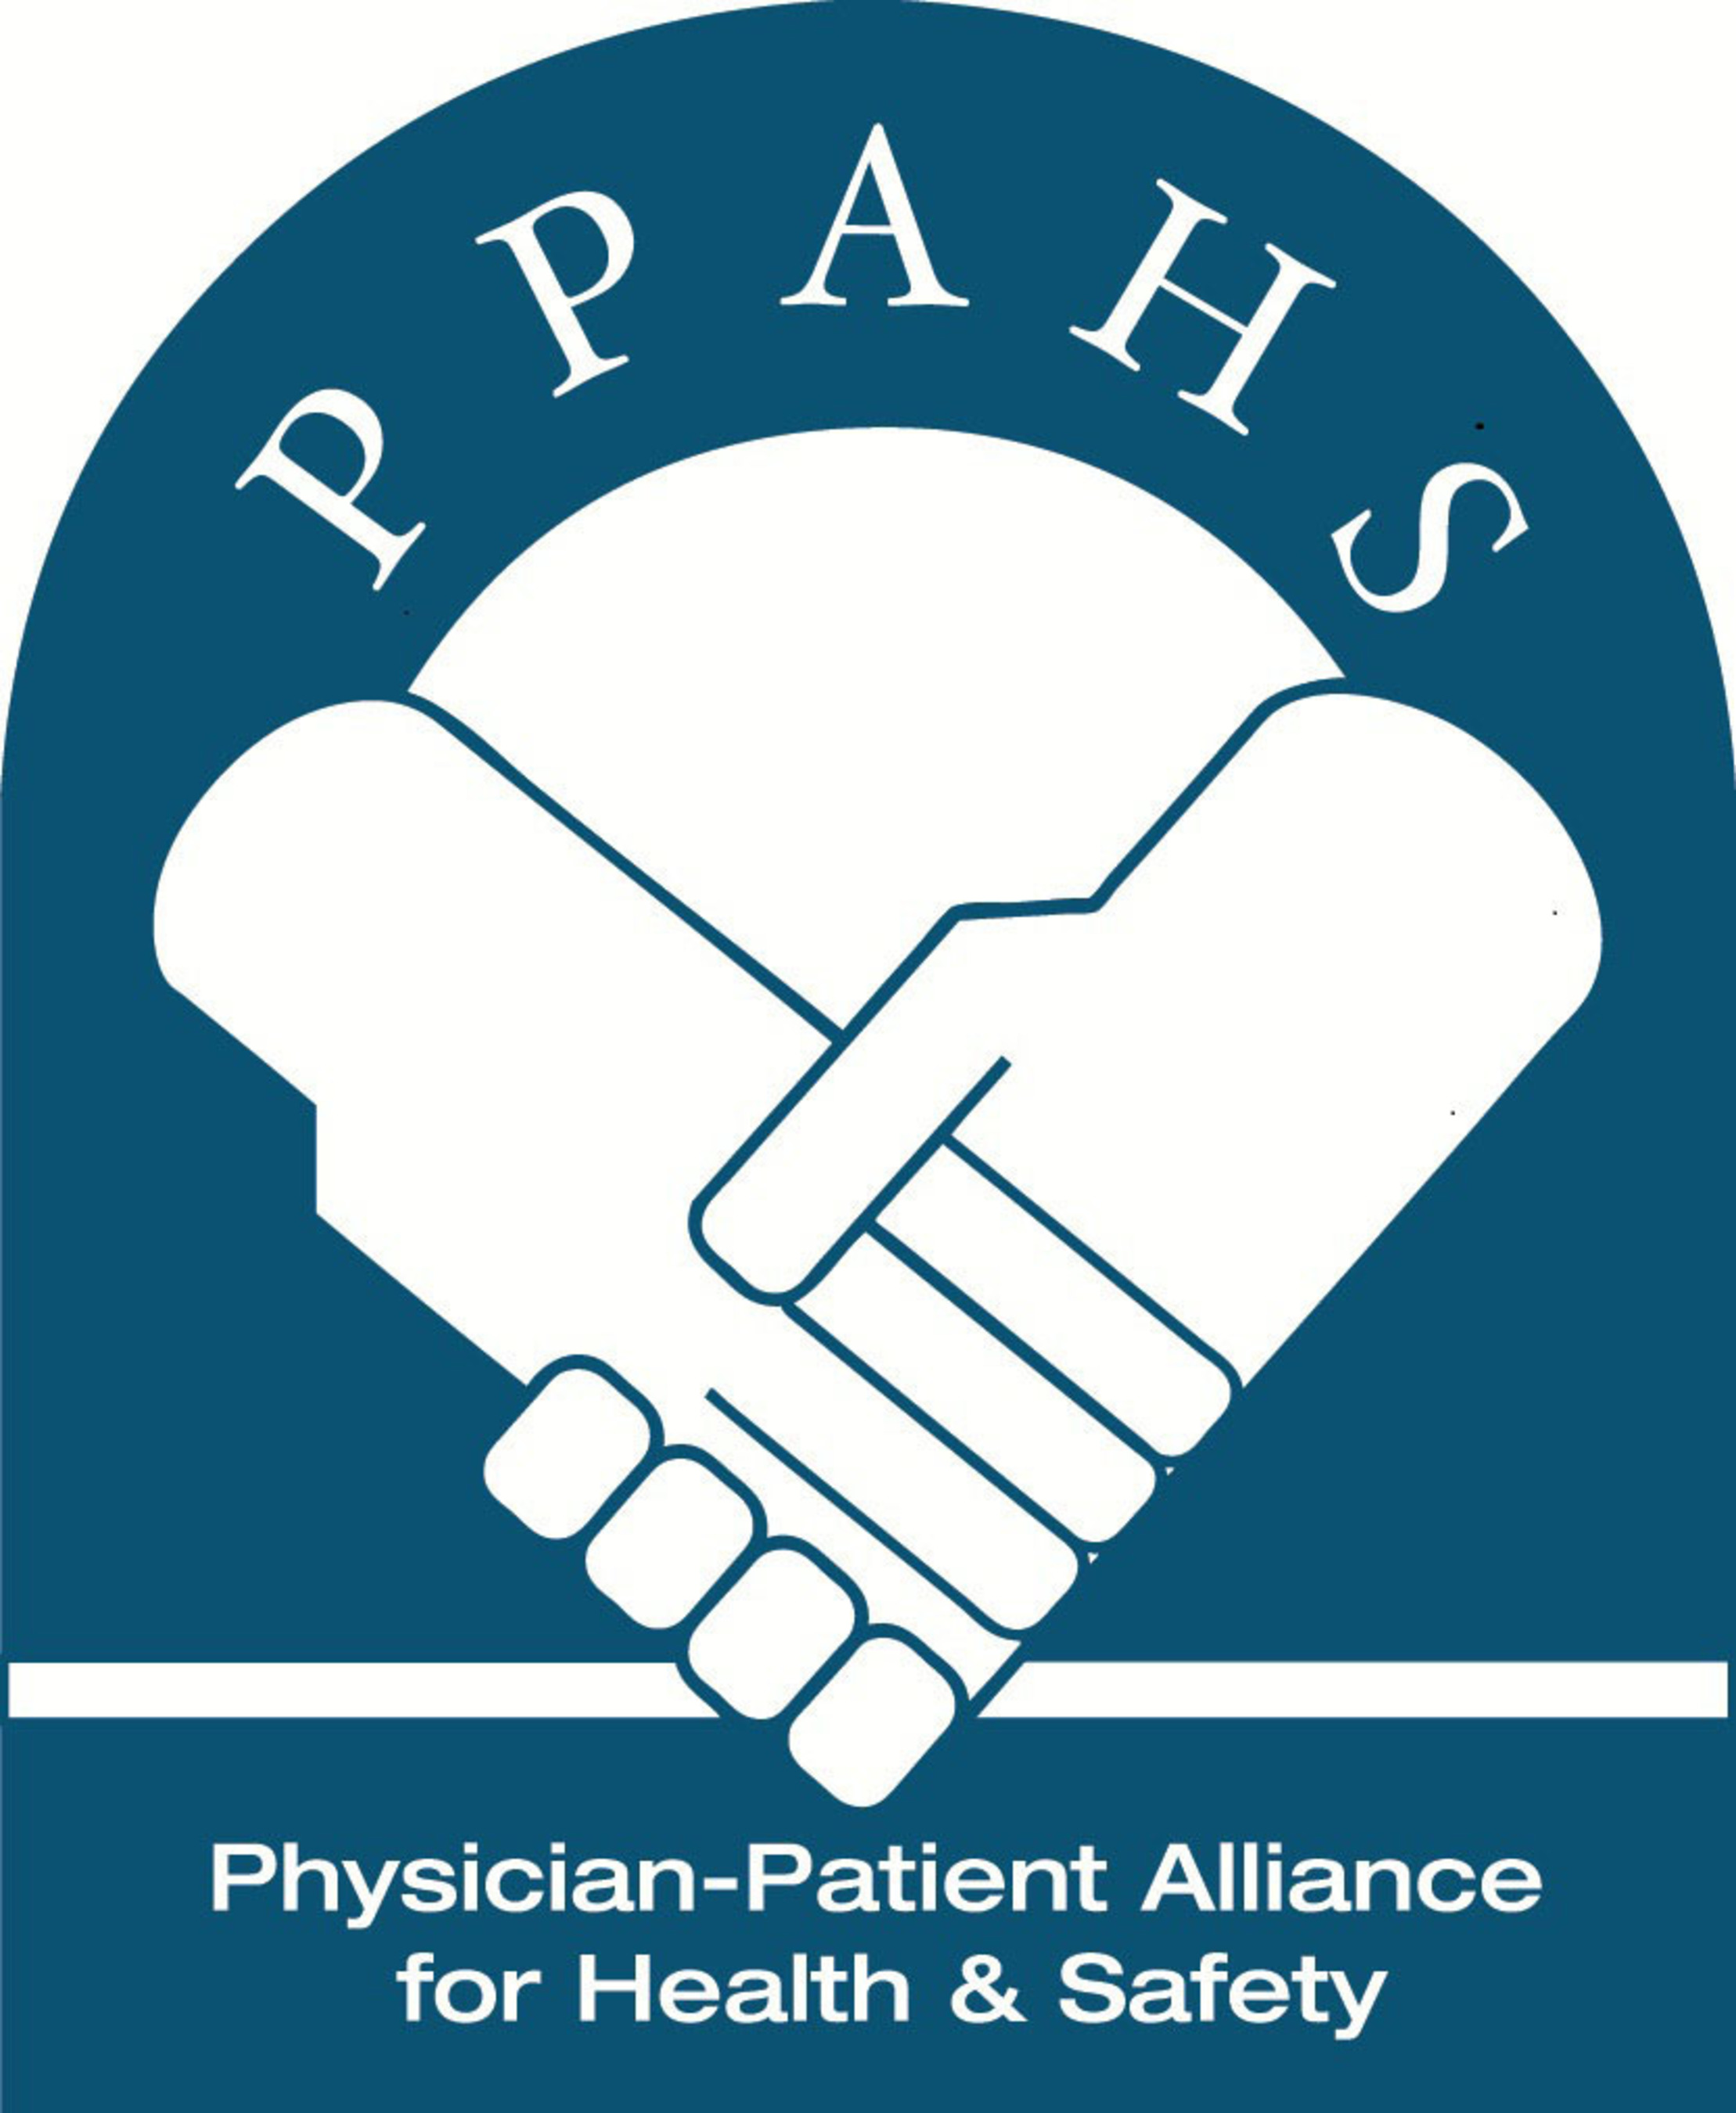 Improving Health & Safety Through Innovation and Awareness. (PRNewsFoto/Physician-Patient Alliance for Health & Safety (PPAHS))